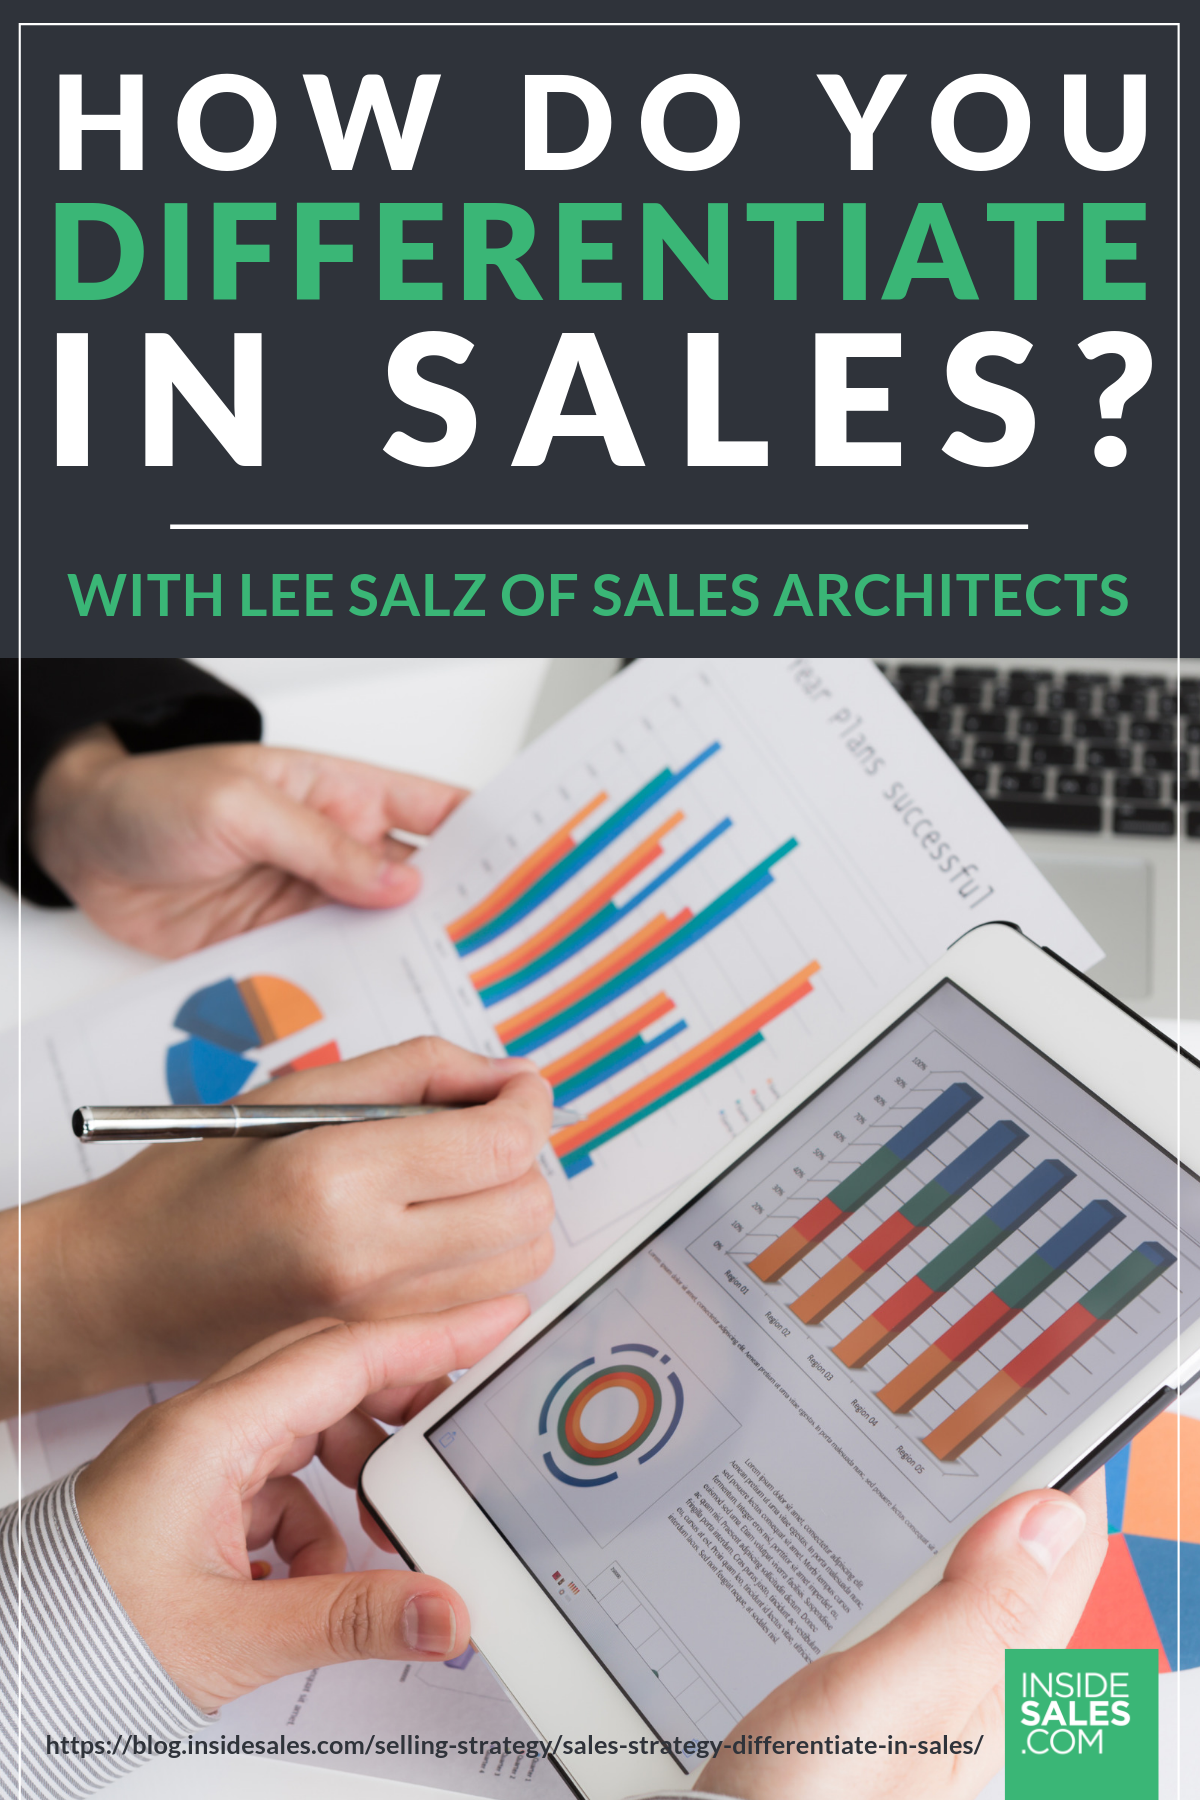 How Do You Differentiate in Sales? w/Lee Salz @Sales Architects https://resources.insidesales.com/blog/selling-strategy/sales-strategy-differentiate-in-sales/